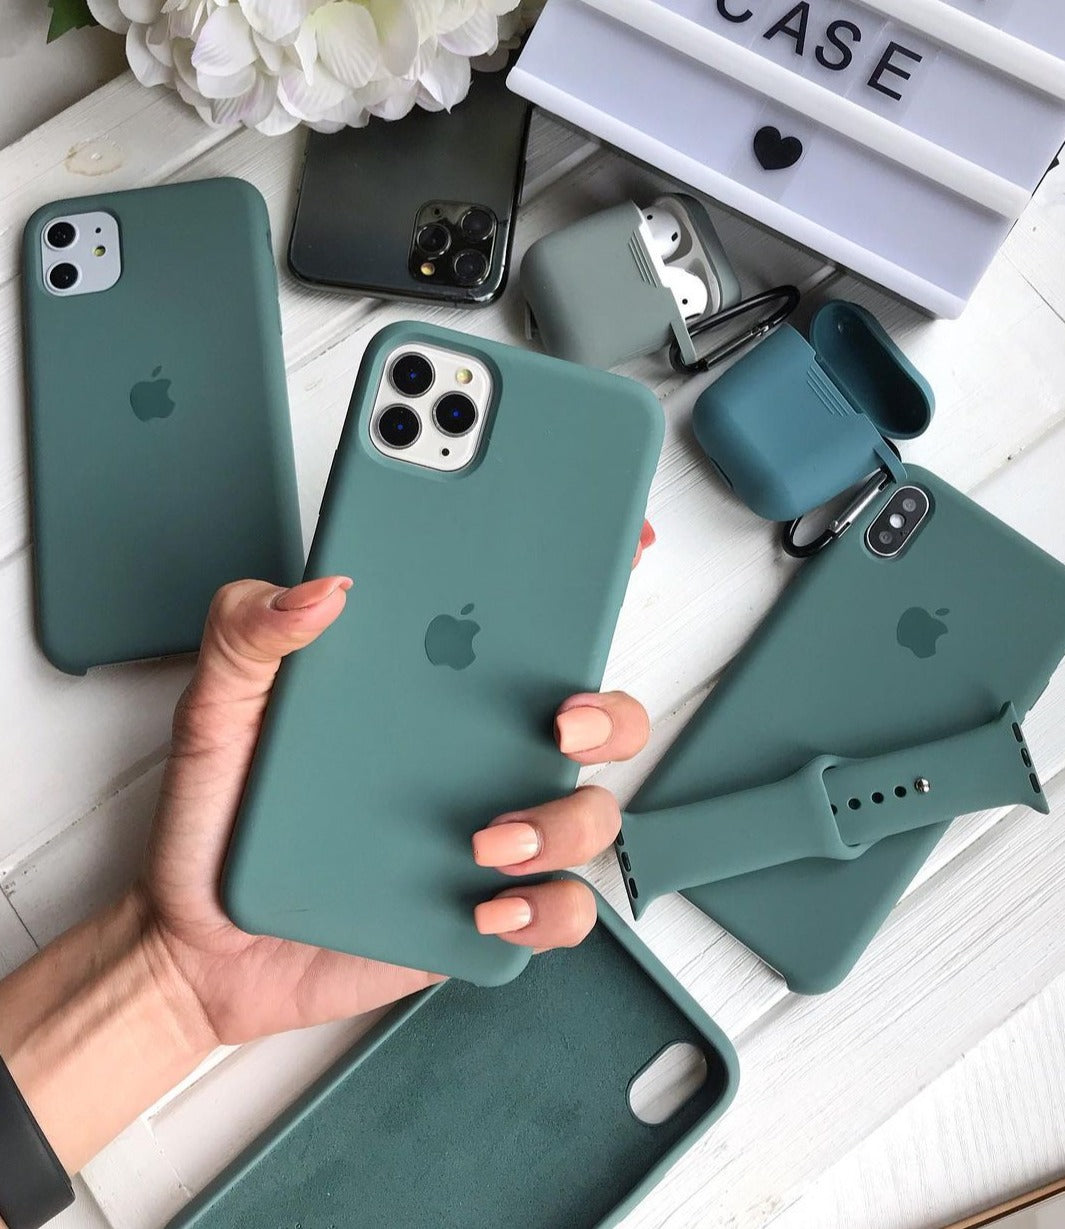 iPhone Silicone Case (Pine Green)